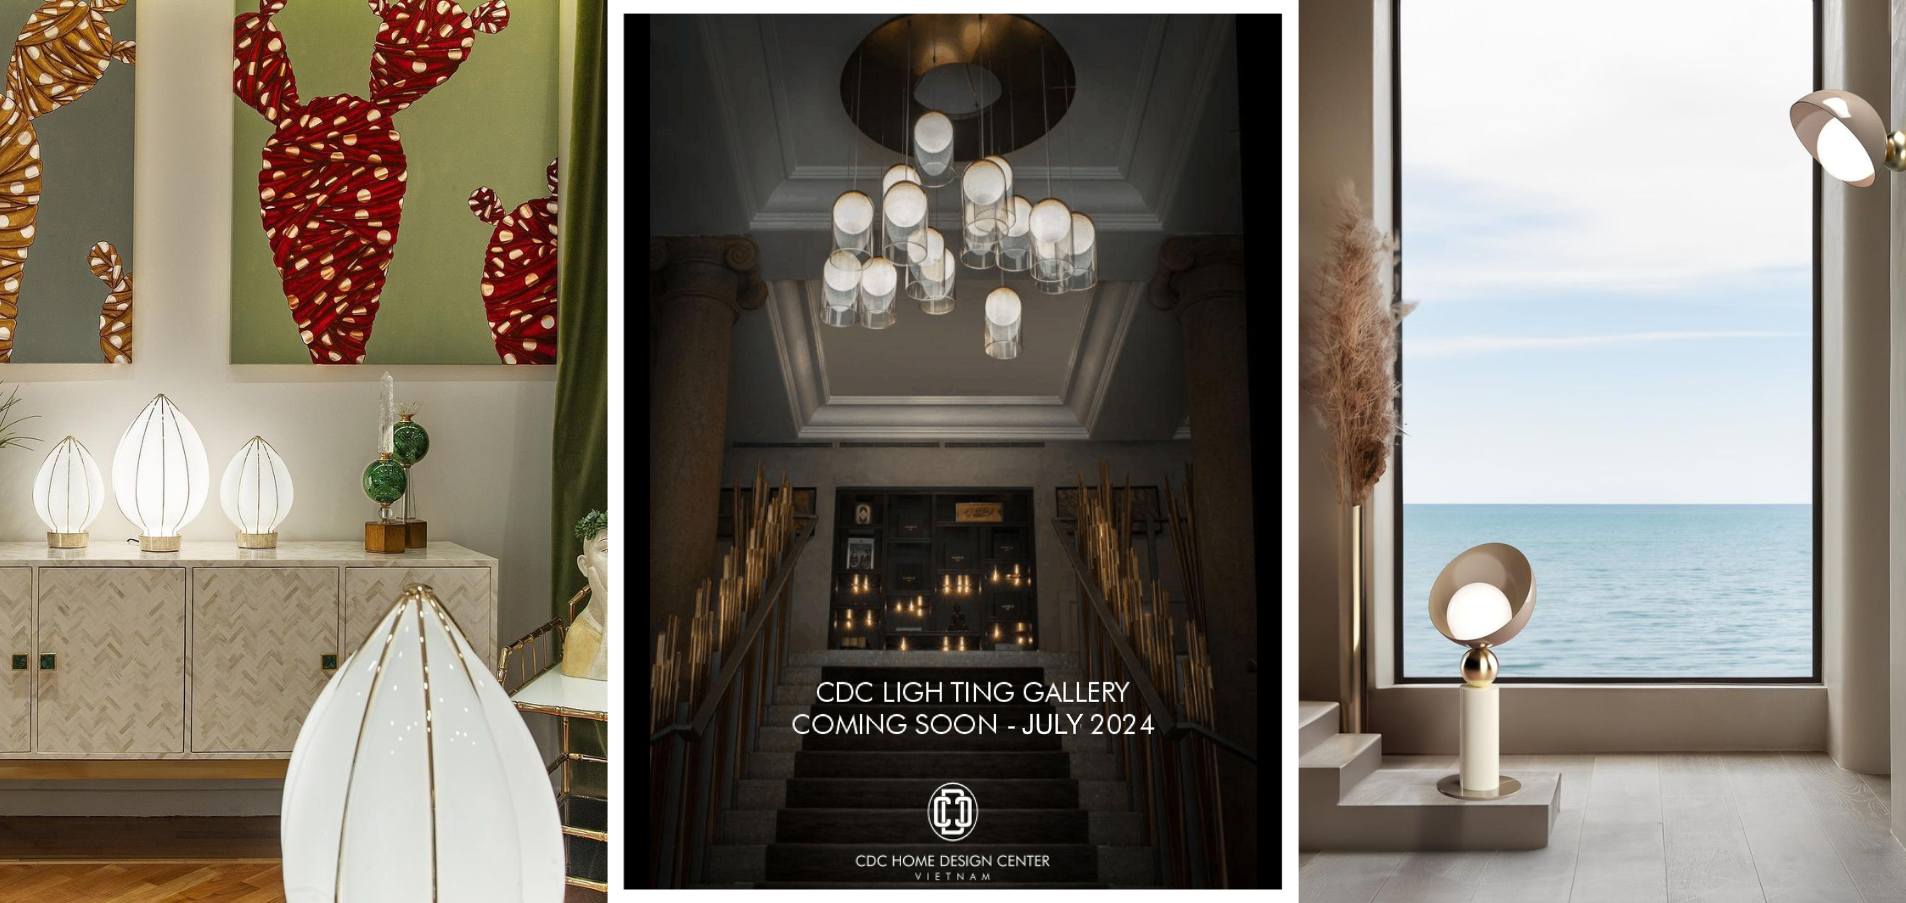 CDC LIGHTING GALLERY - Coming Soon - the 26th July 2024